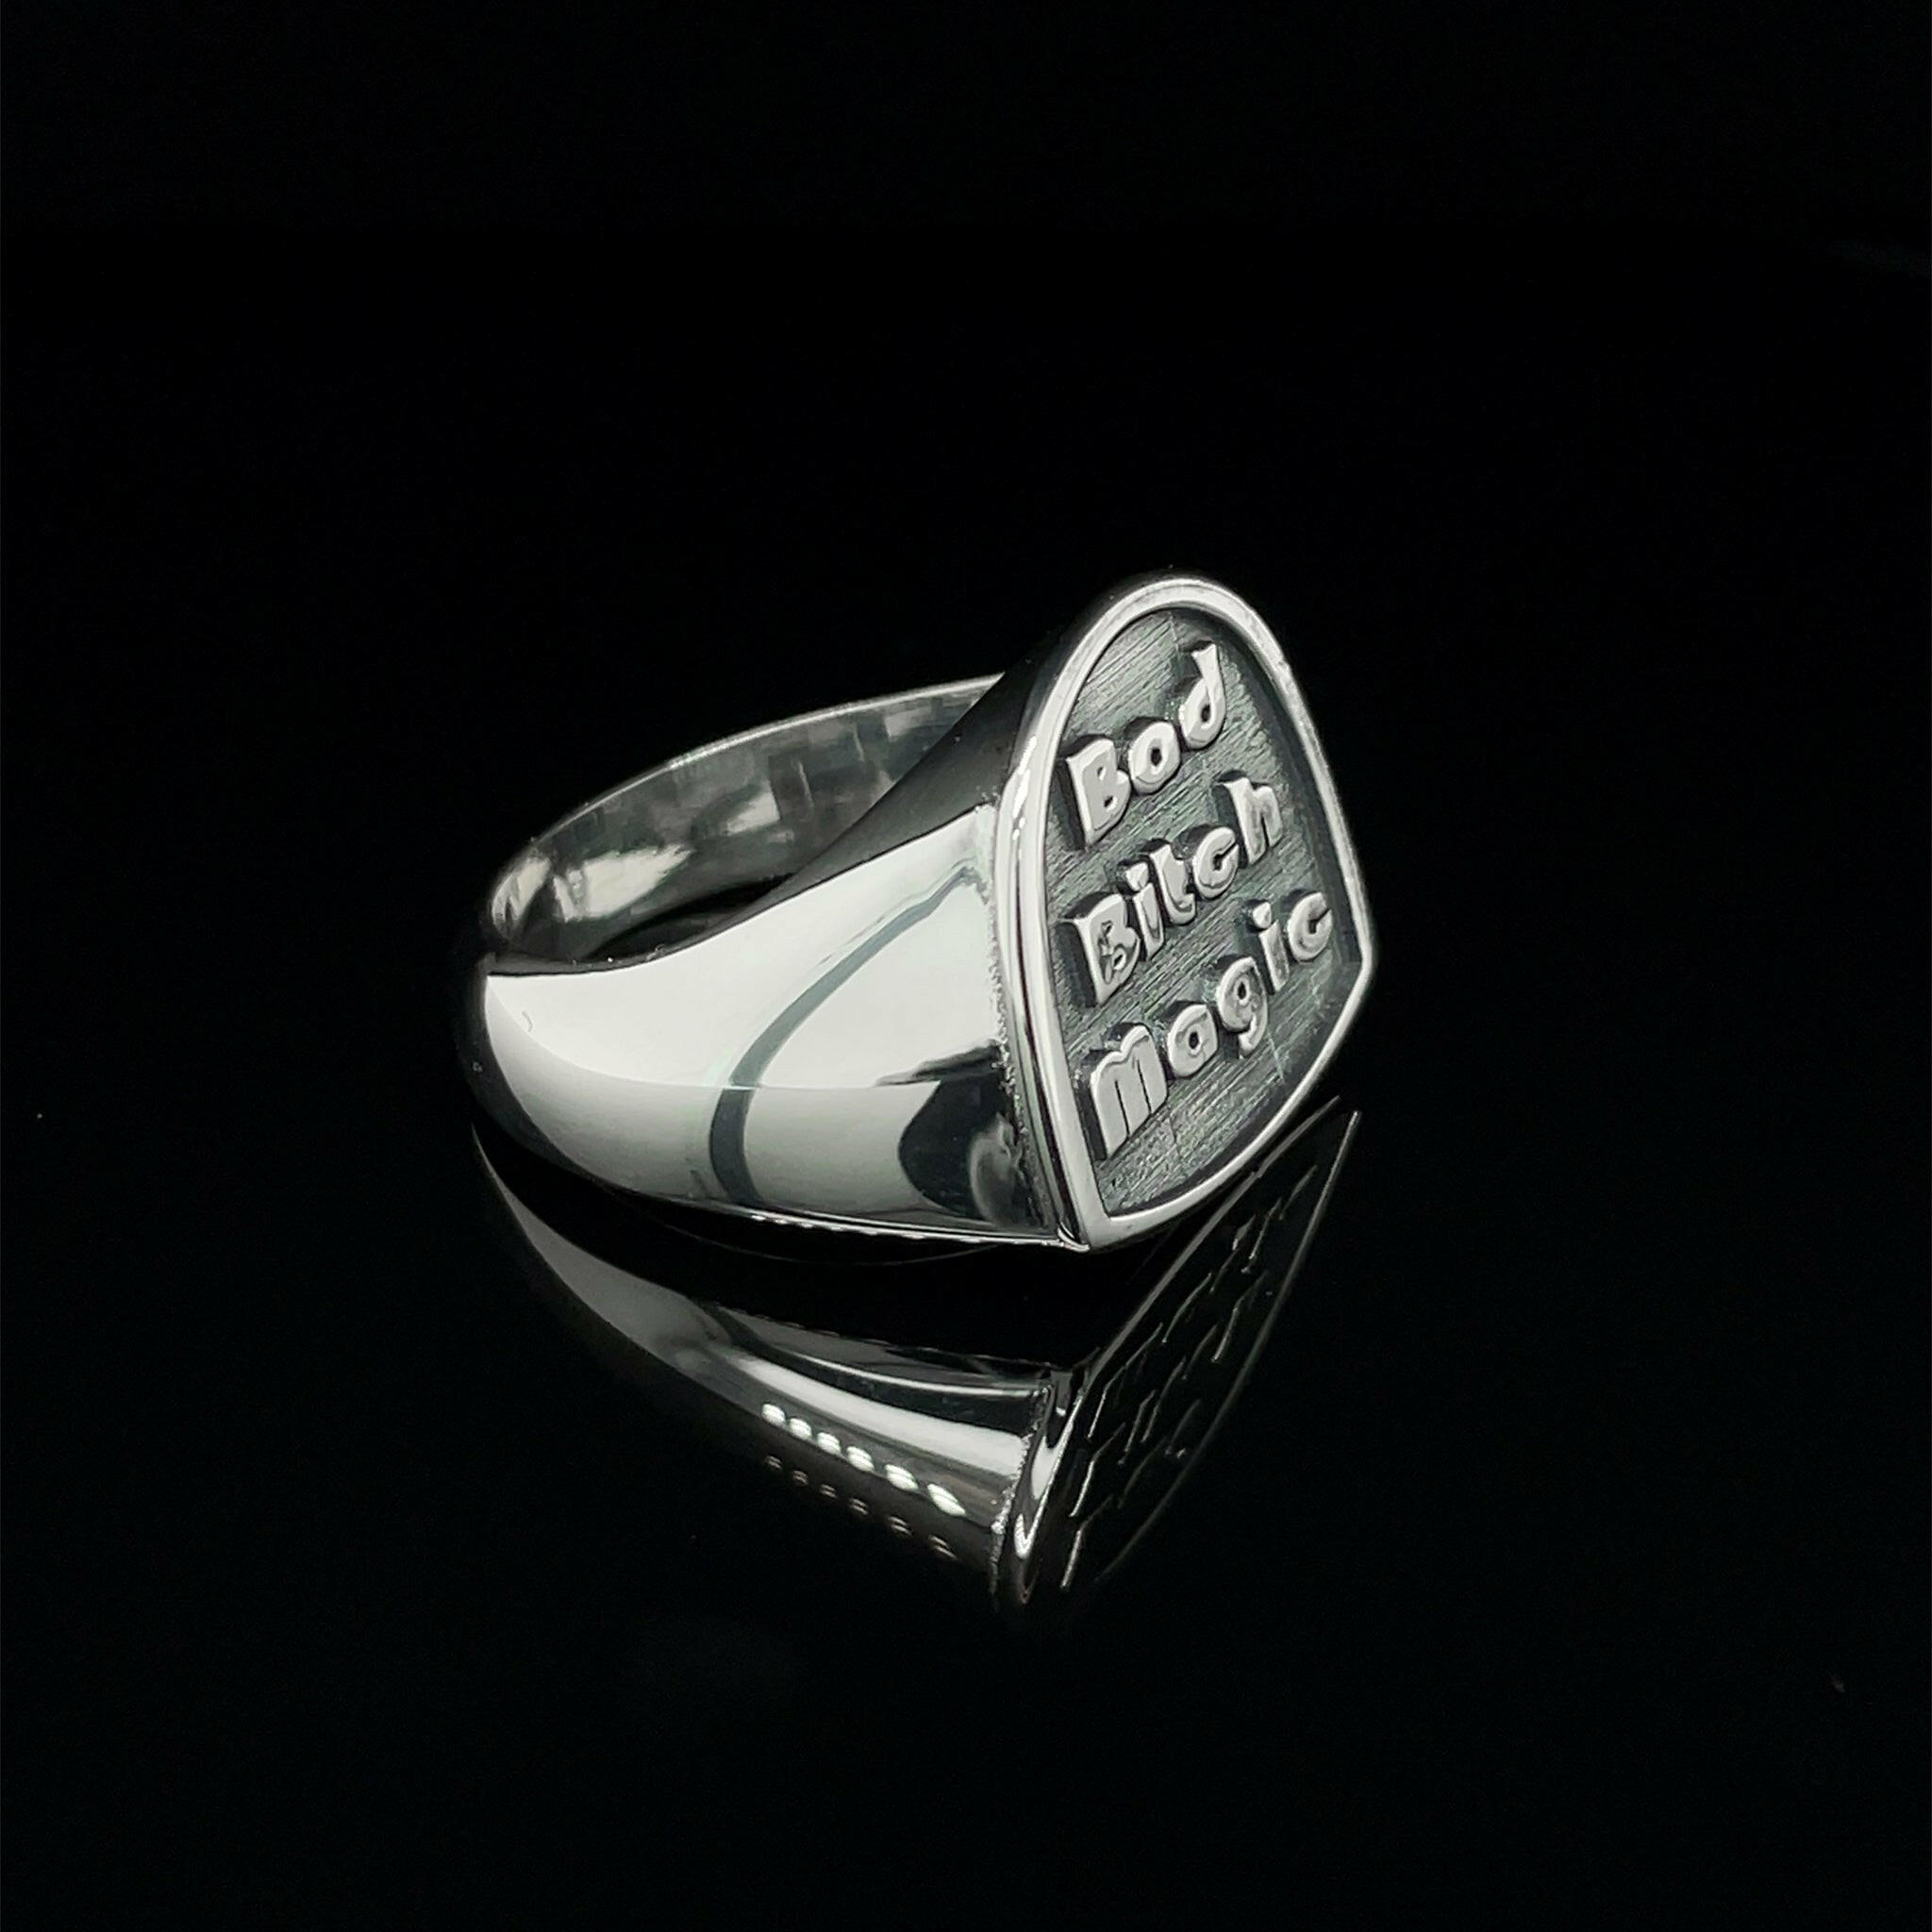 front left side of sterling silver ring reads "bad bitch magic"